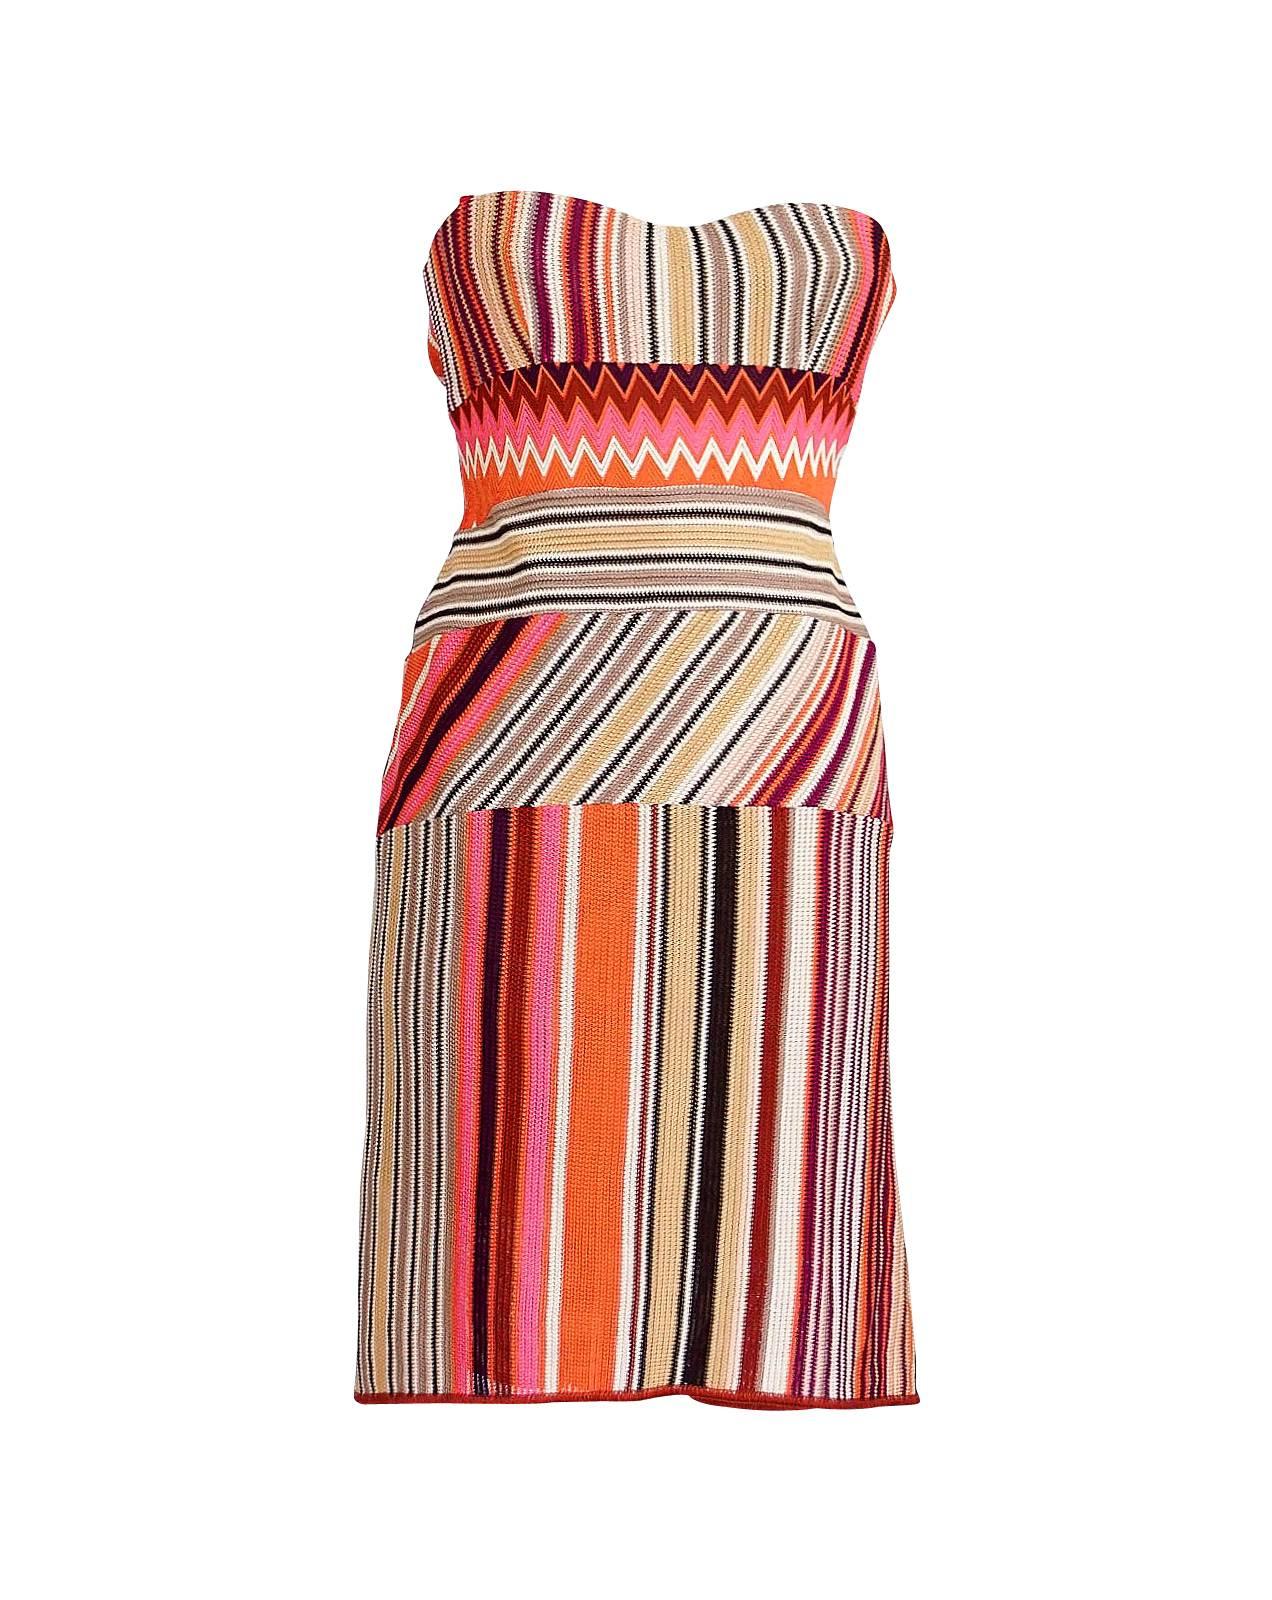 Mightychic offers a  Missoni strapless with stunning knit details dress.
Shades of pink, orange, brown, rust, gold and cranberry create a flattering shape.
Dress has 5 panels highlighting the Missoni patterns.
Interior has built in bra and boning